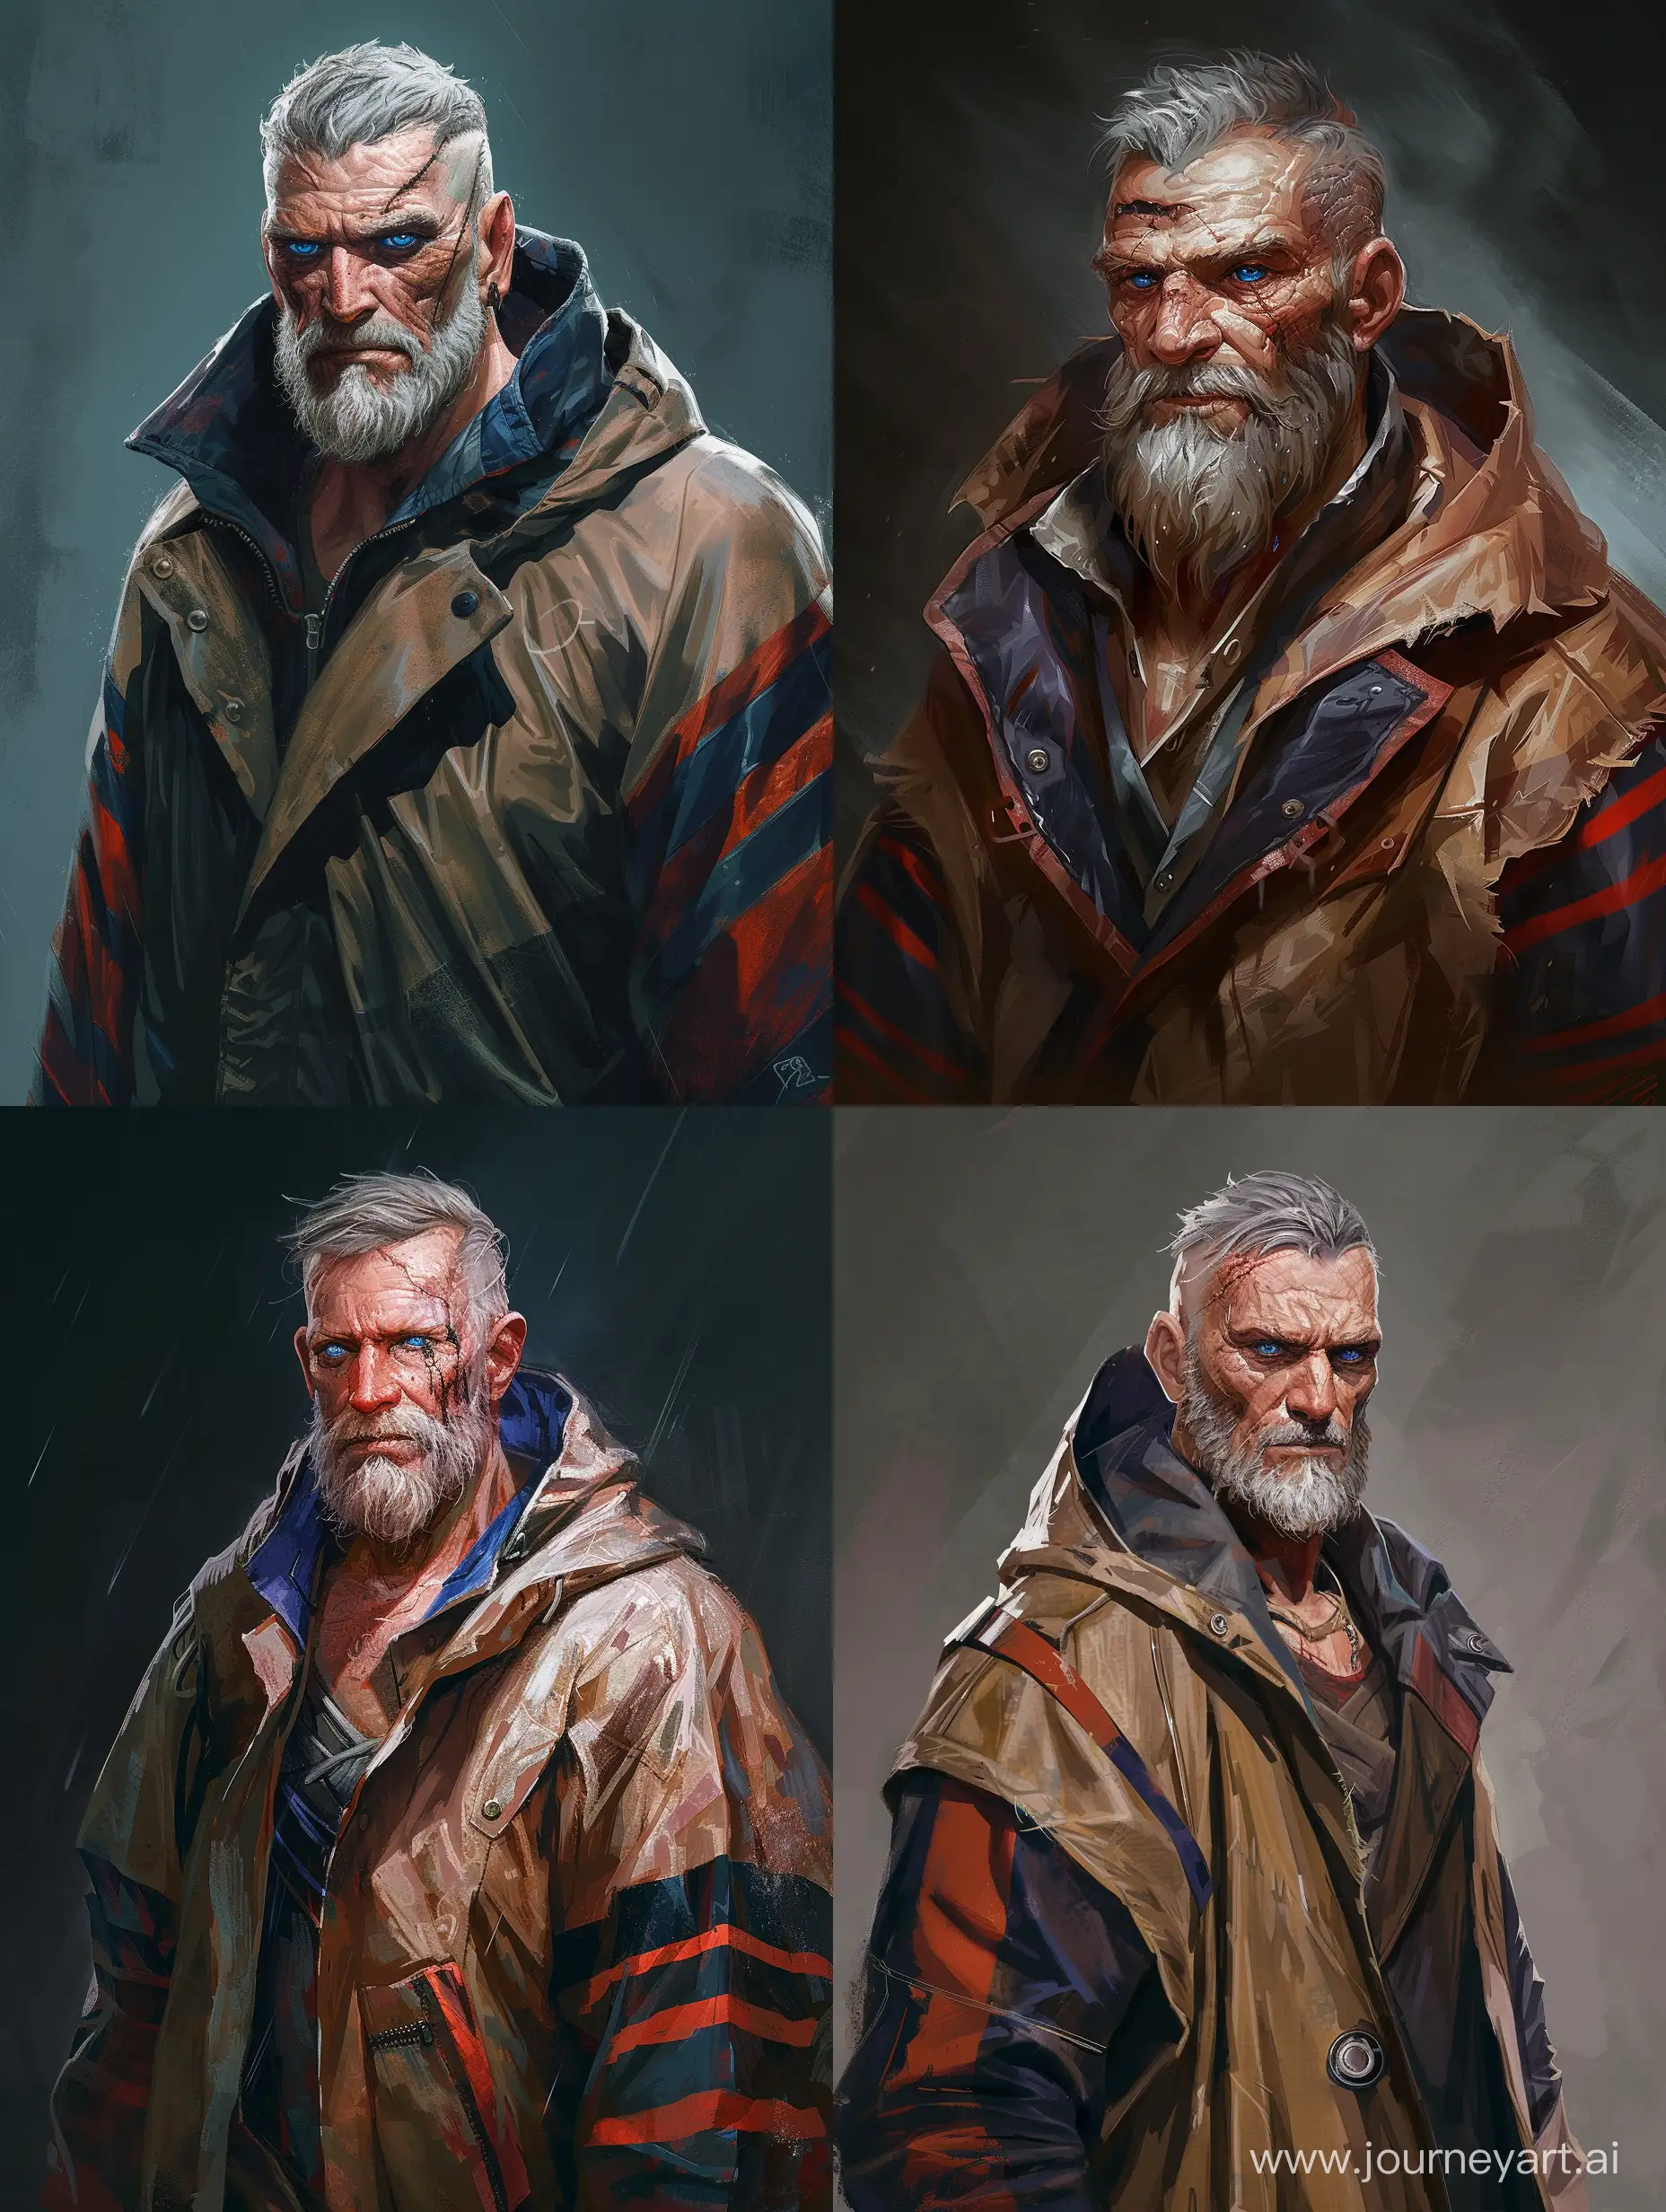 Weathered-and-Muscular-Old-Man-with-Blue-Eyes-and-Gray-Hair-in-Striped-Raincoat